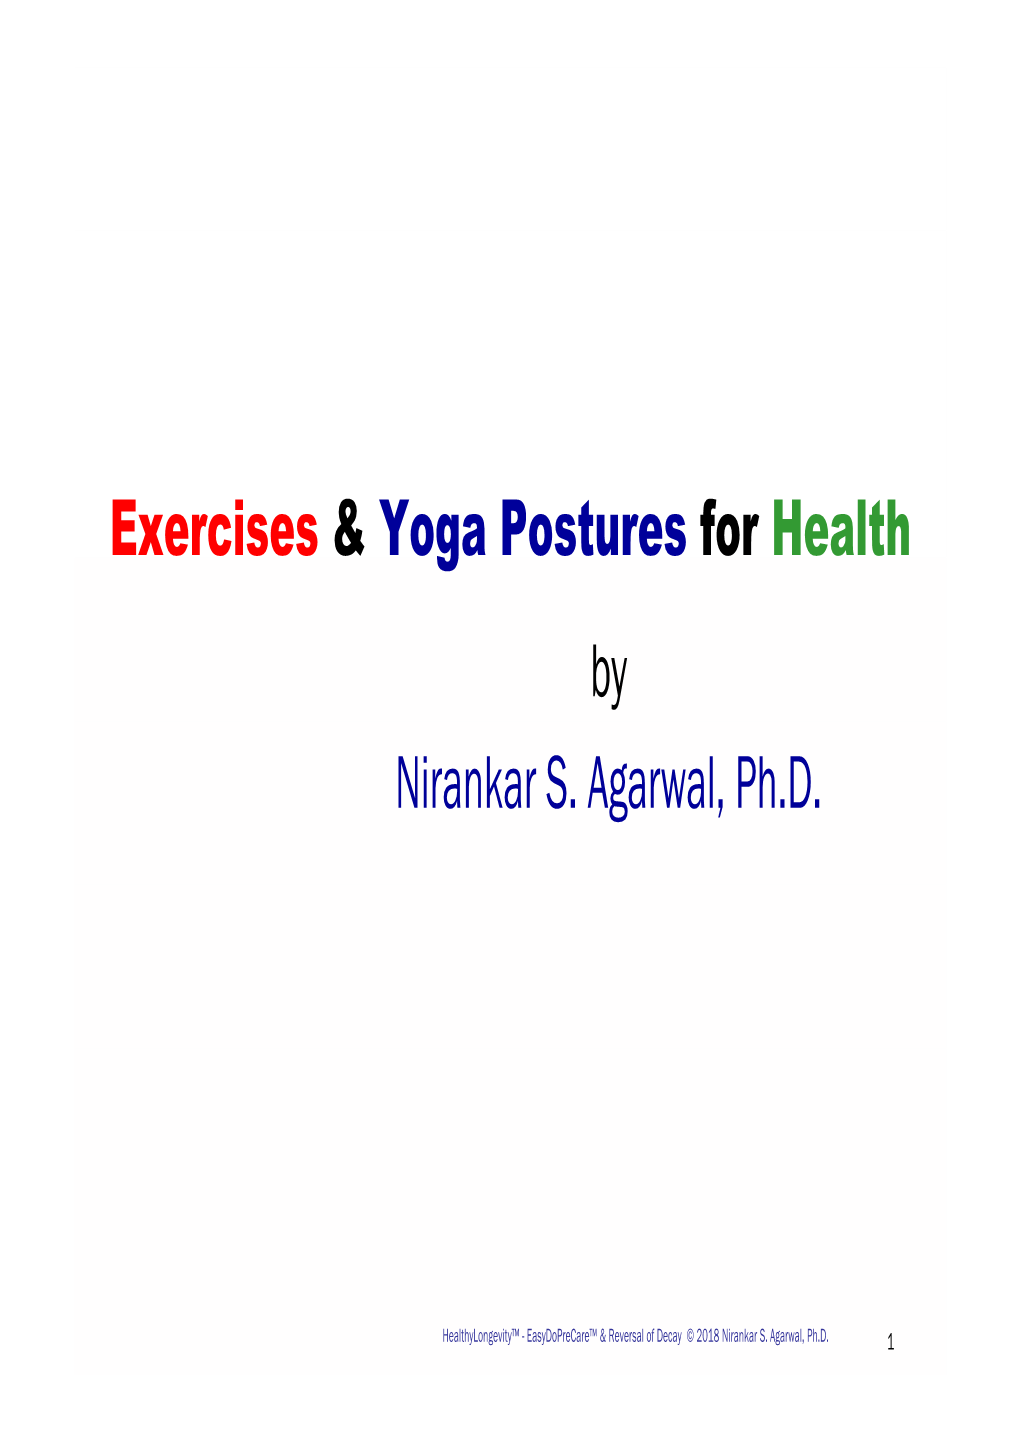 Exercises & Yoga Postures for Health